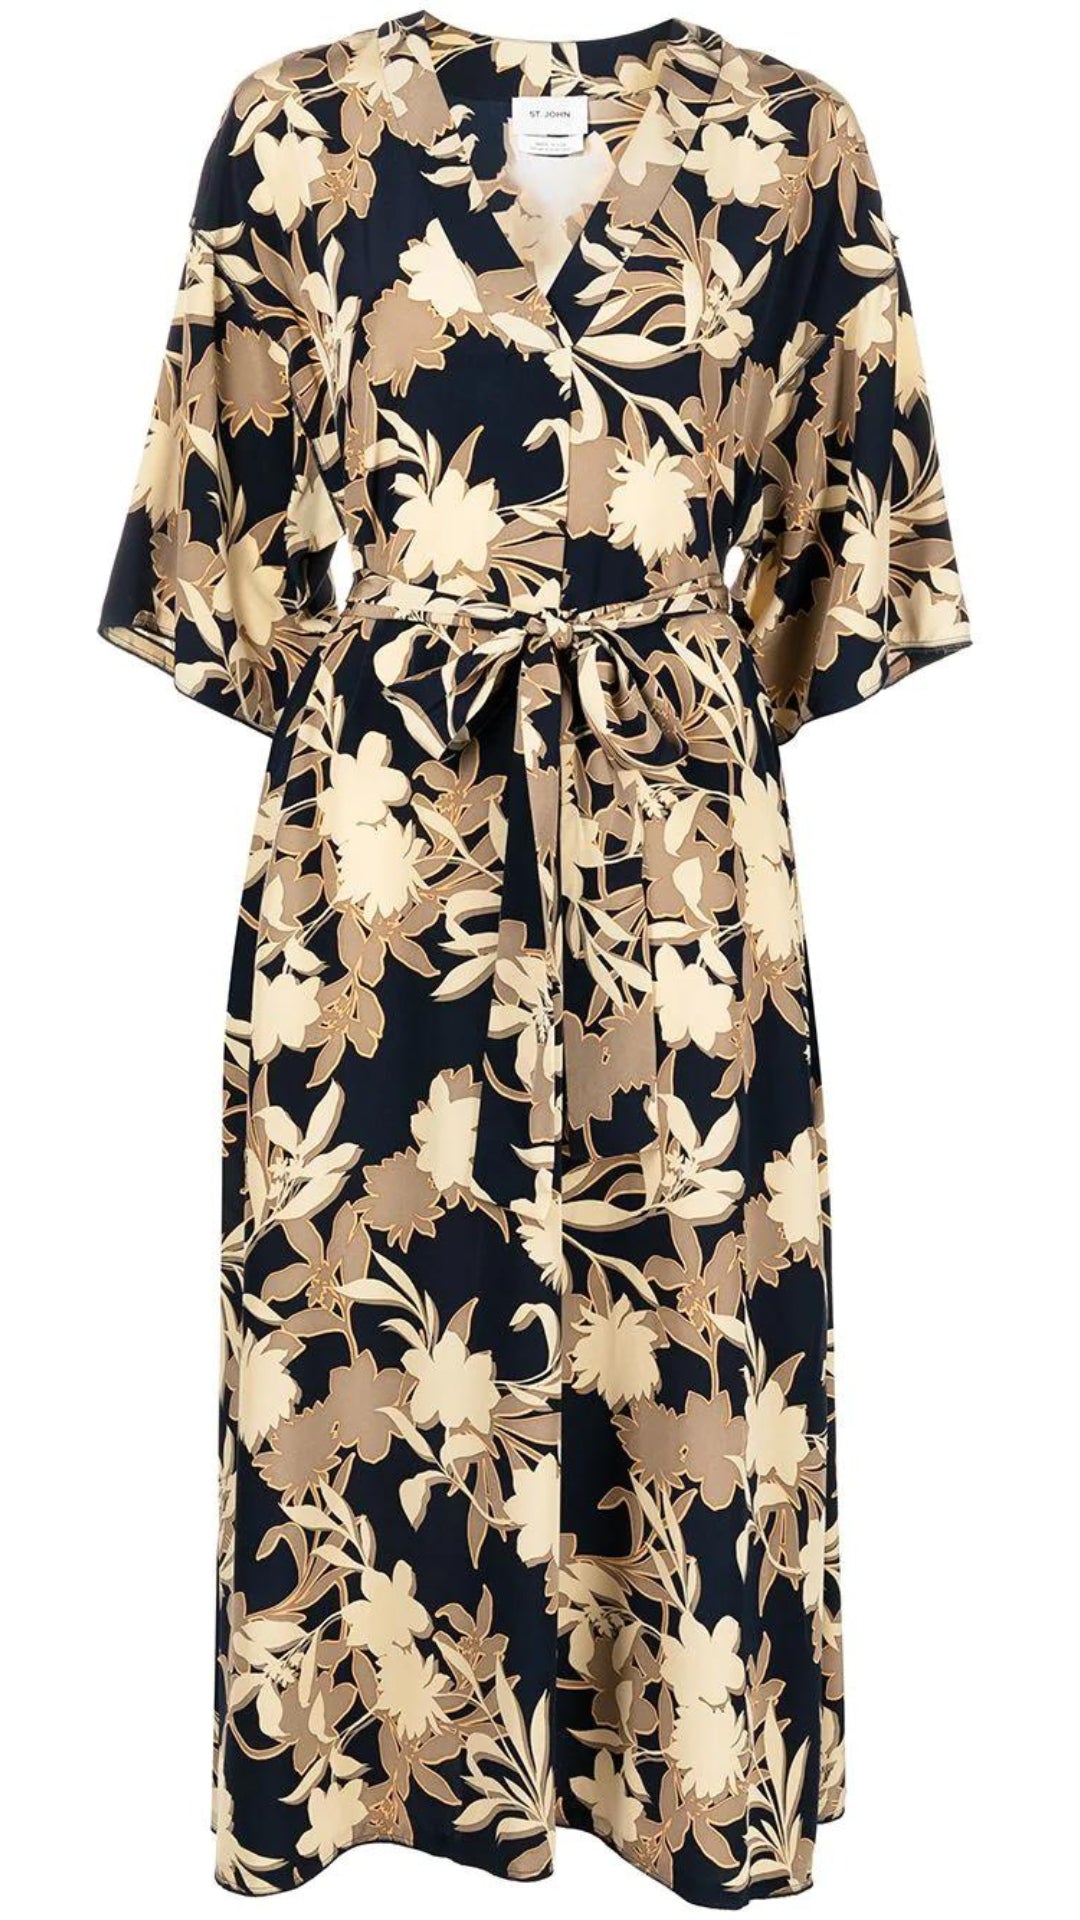 St John Knits Floral Print Silk Midi Dress. Kimono style dress in natural tones and navy blue. With a silk tie belt and half length sleeves. Midi length. Product photo front facing.